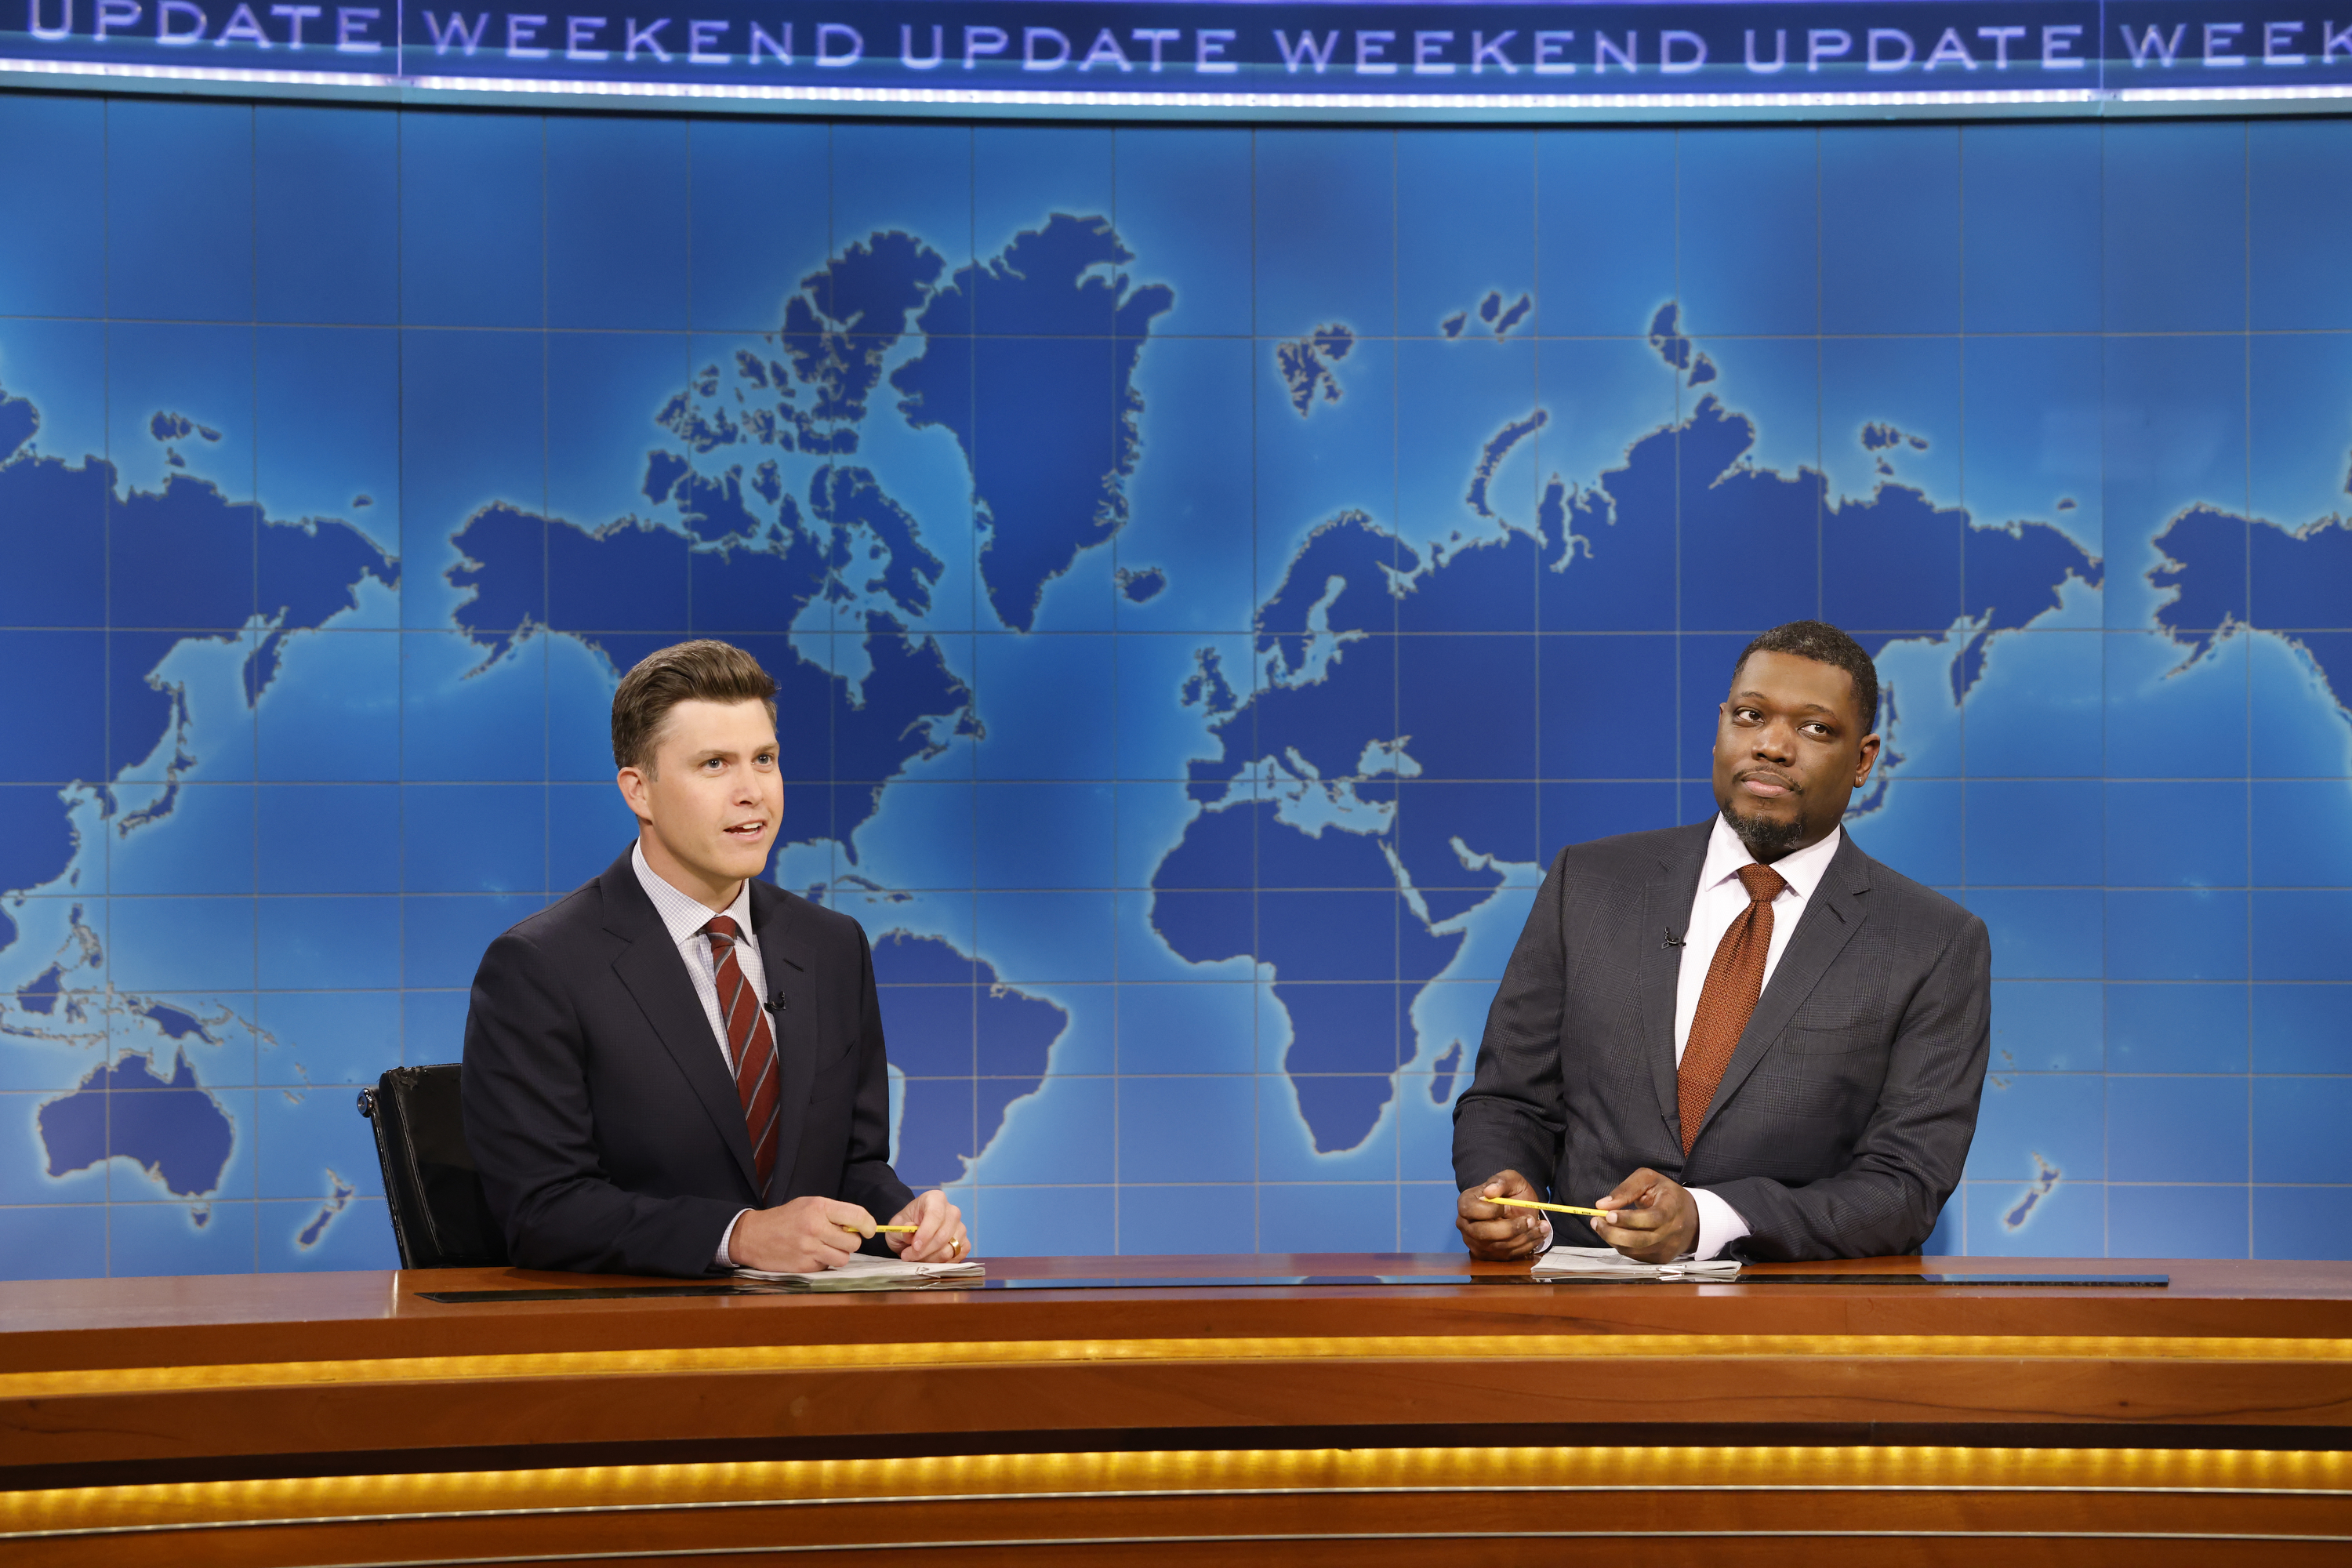 Colin Jost was set up by friend and co-anchor Michael Che during Weekend Update